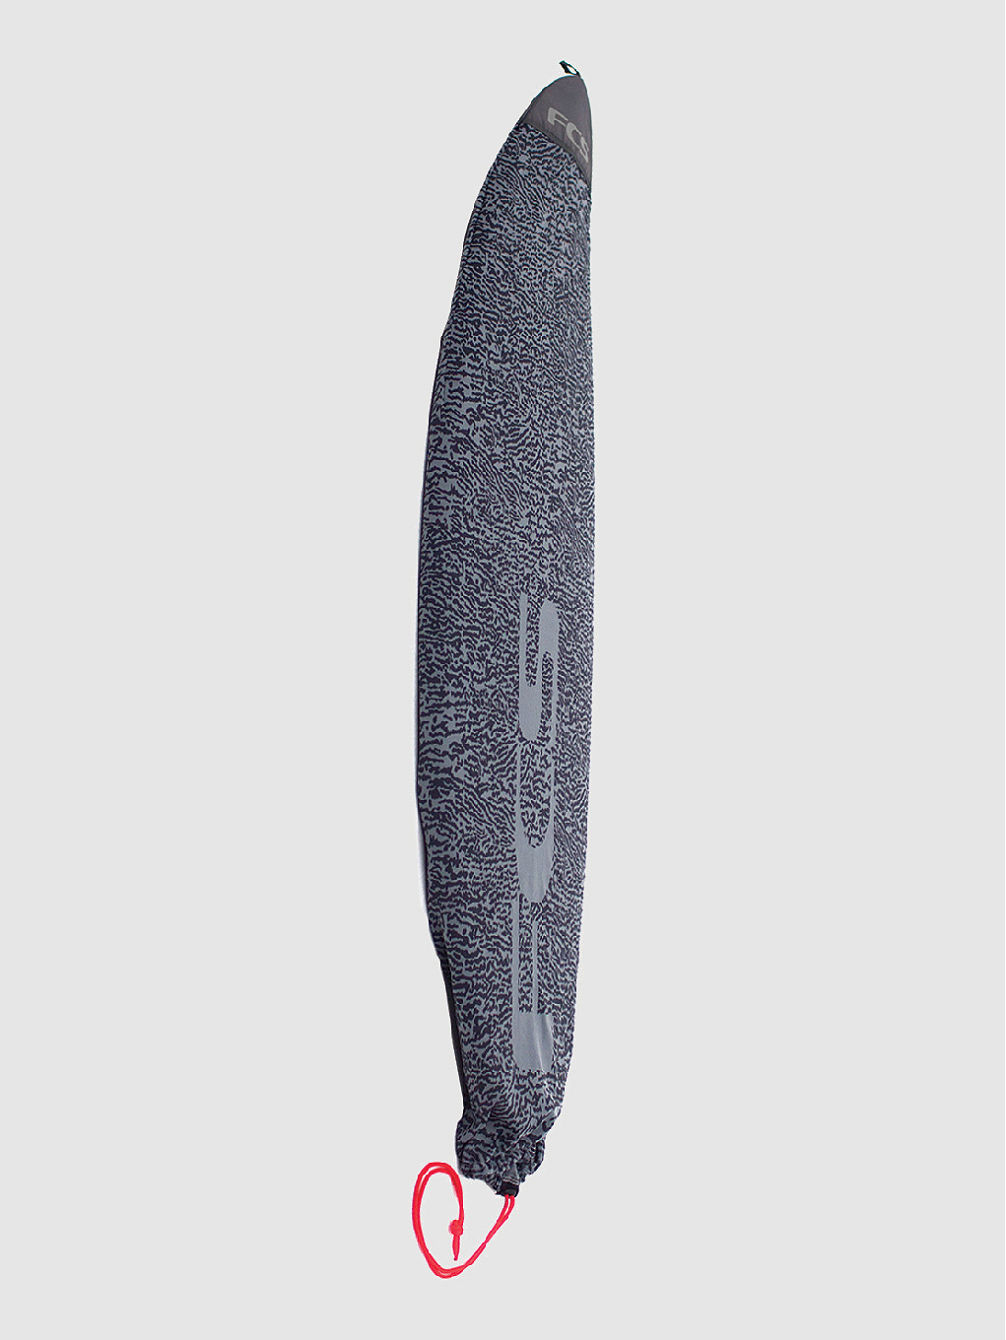 Stretch All Purpose 6&amp;#039;0 Surfboard Bag